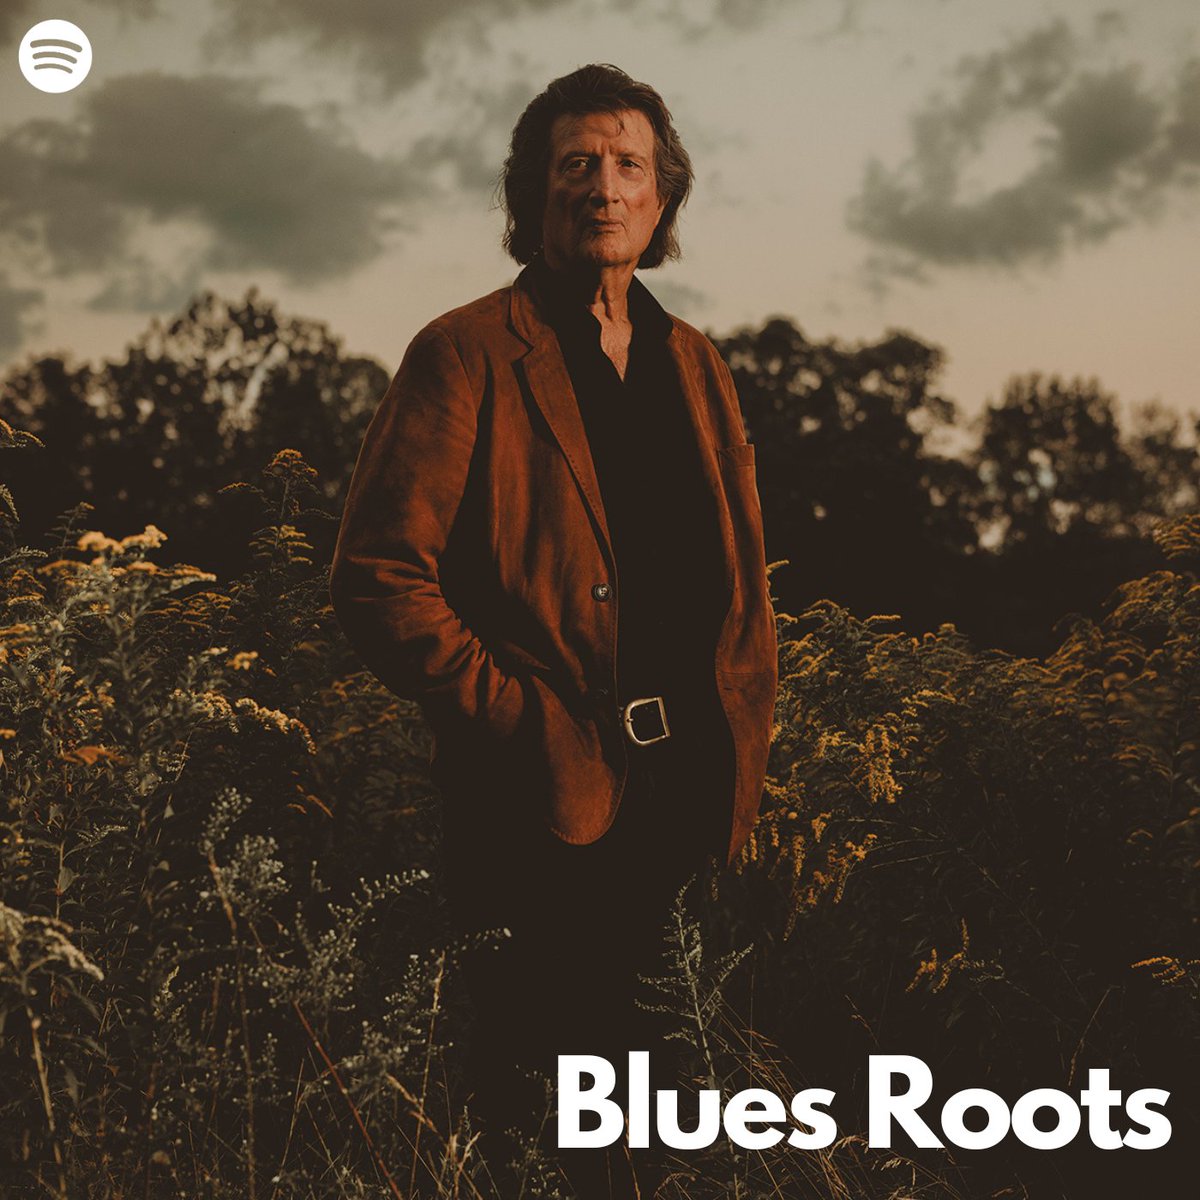 'Evidence that he remains one of the most consistent and truthful artists of his time' (@PopMatters) – @ChrisSmither_ 's new single 'All About the Bones' is #nowplaying on @Spotify's 'Blues Roots' playlist! Listen here: open.spotify.com/playlist/37i9d…